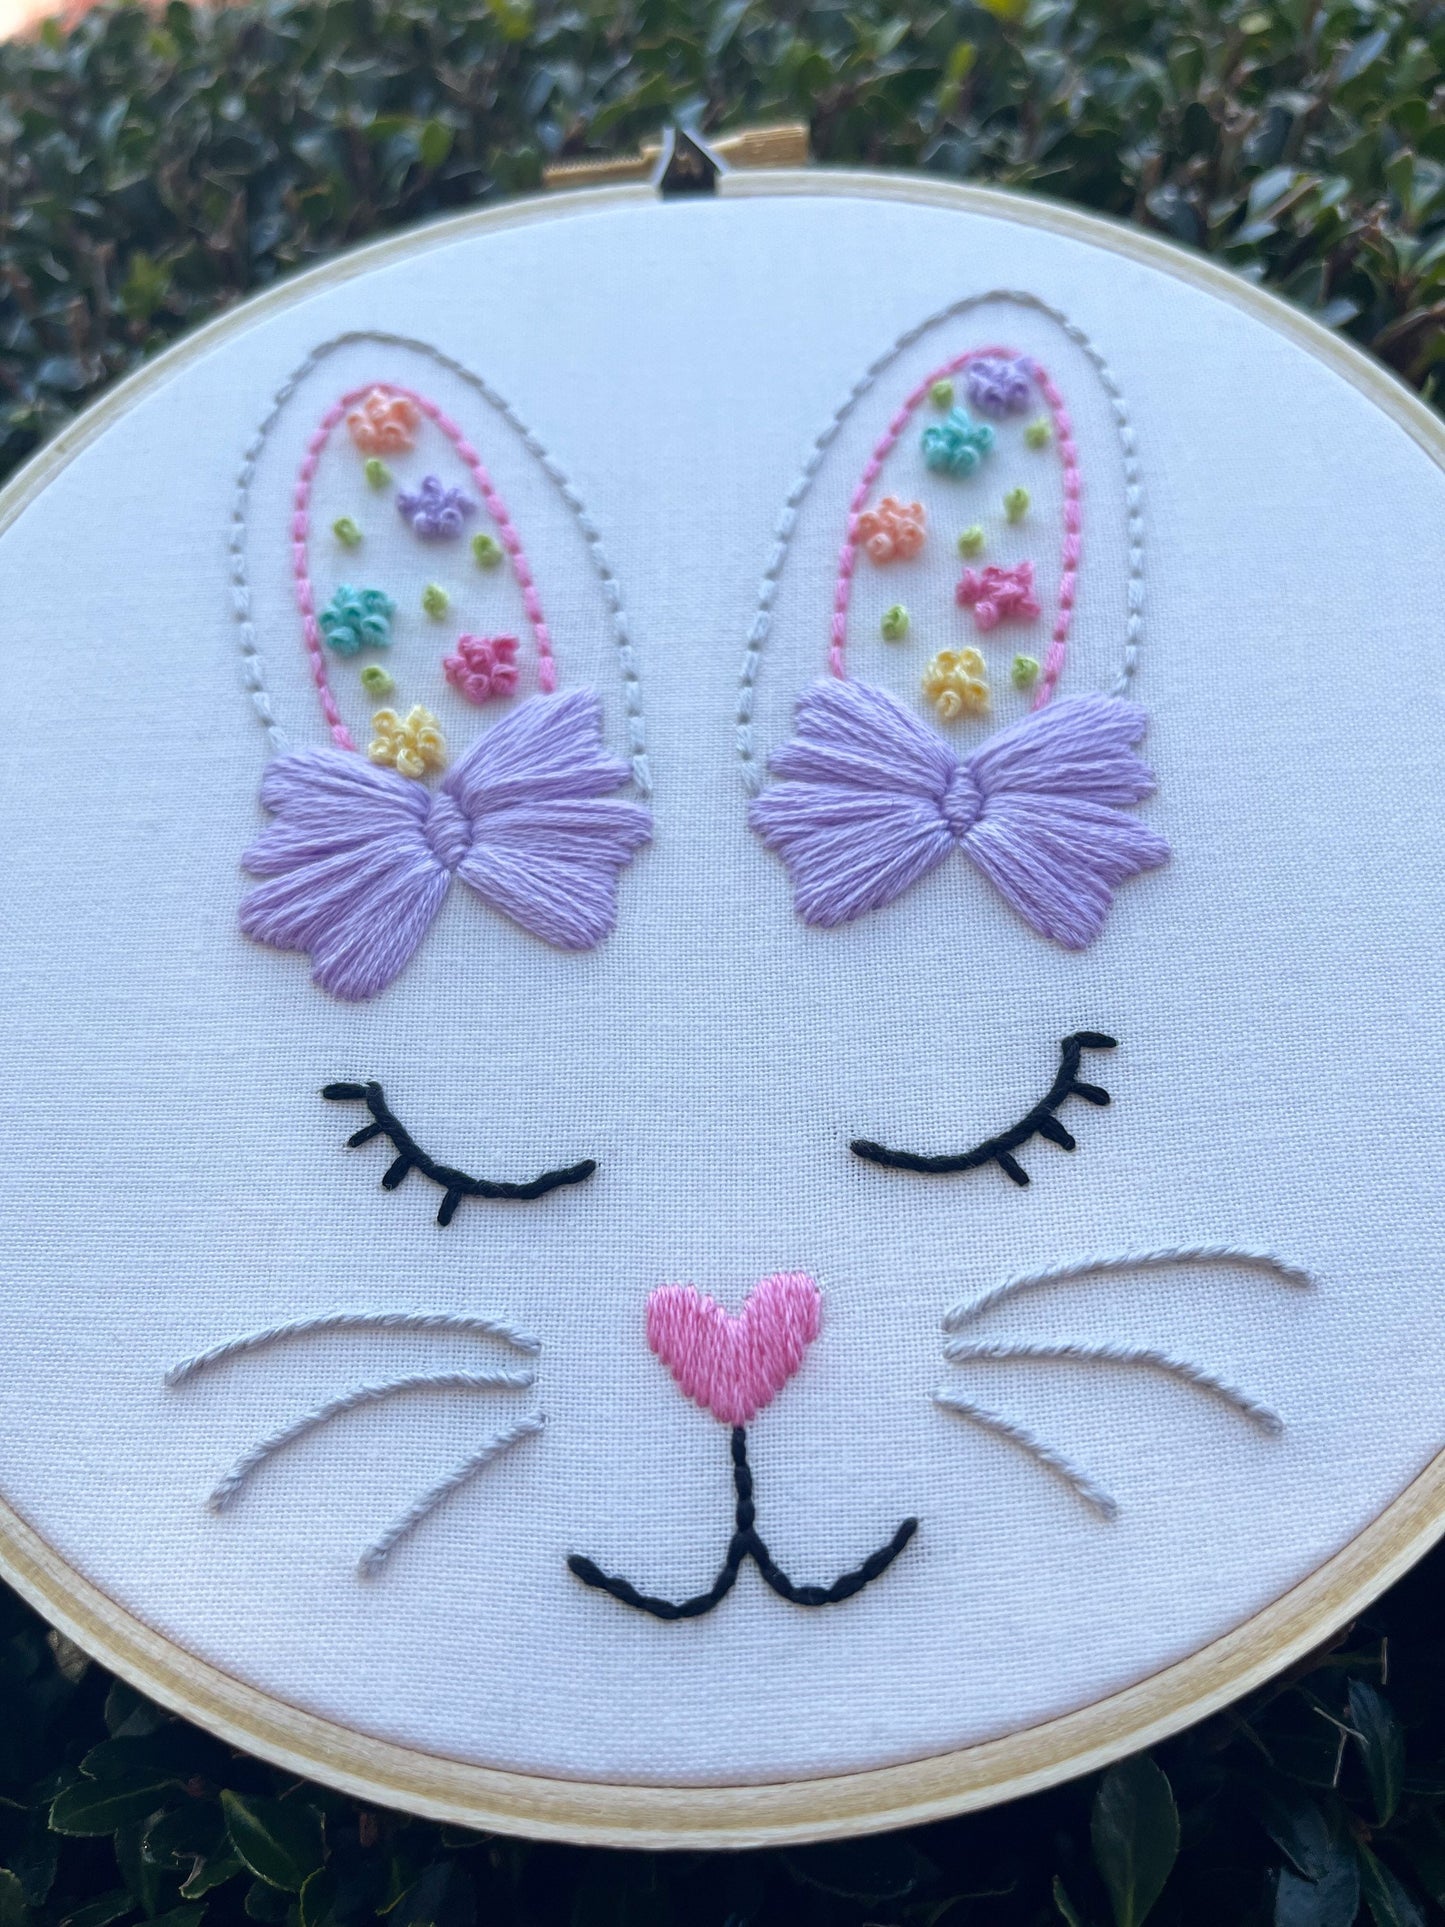 6” Bunny with Bows - Handmade Embroidery Hoop